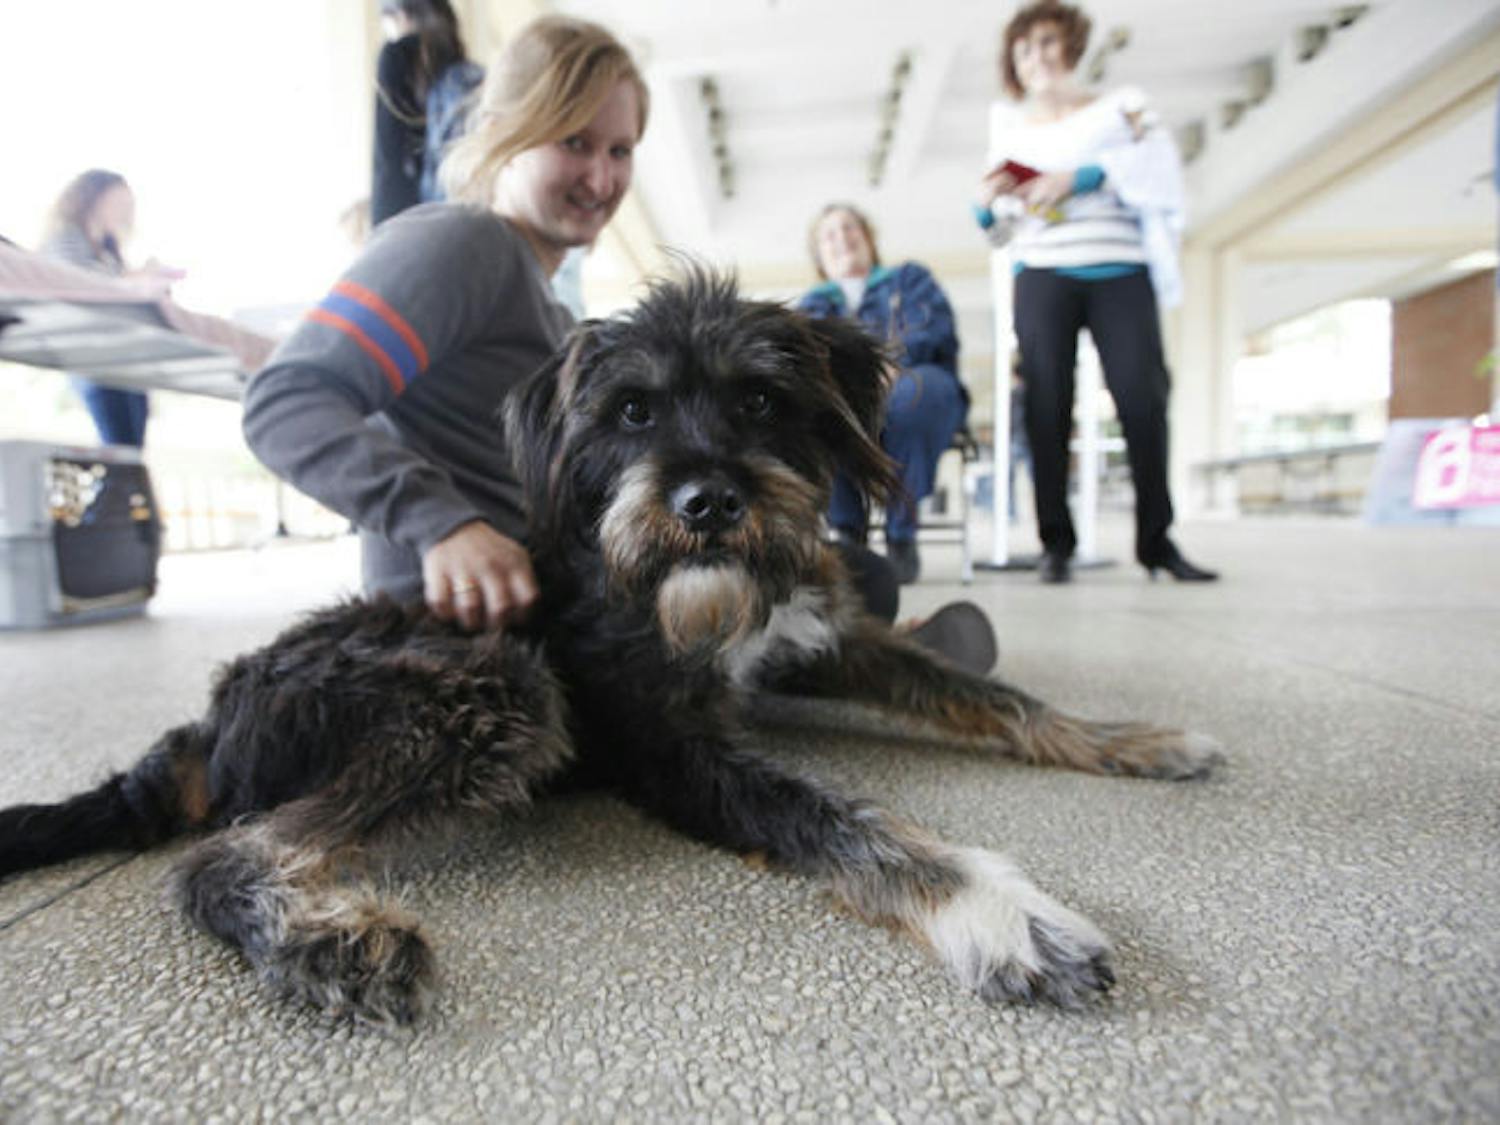 Megan Hammerling, an 18-year-old UF criminology freshman, holds Mulligan, a rescued, three-legged mixed breed from Animal People Inc., at the De-Stress Study Fest at the Reitz Union on Monday morning.